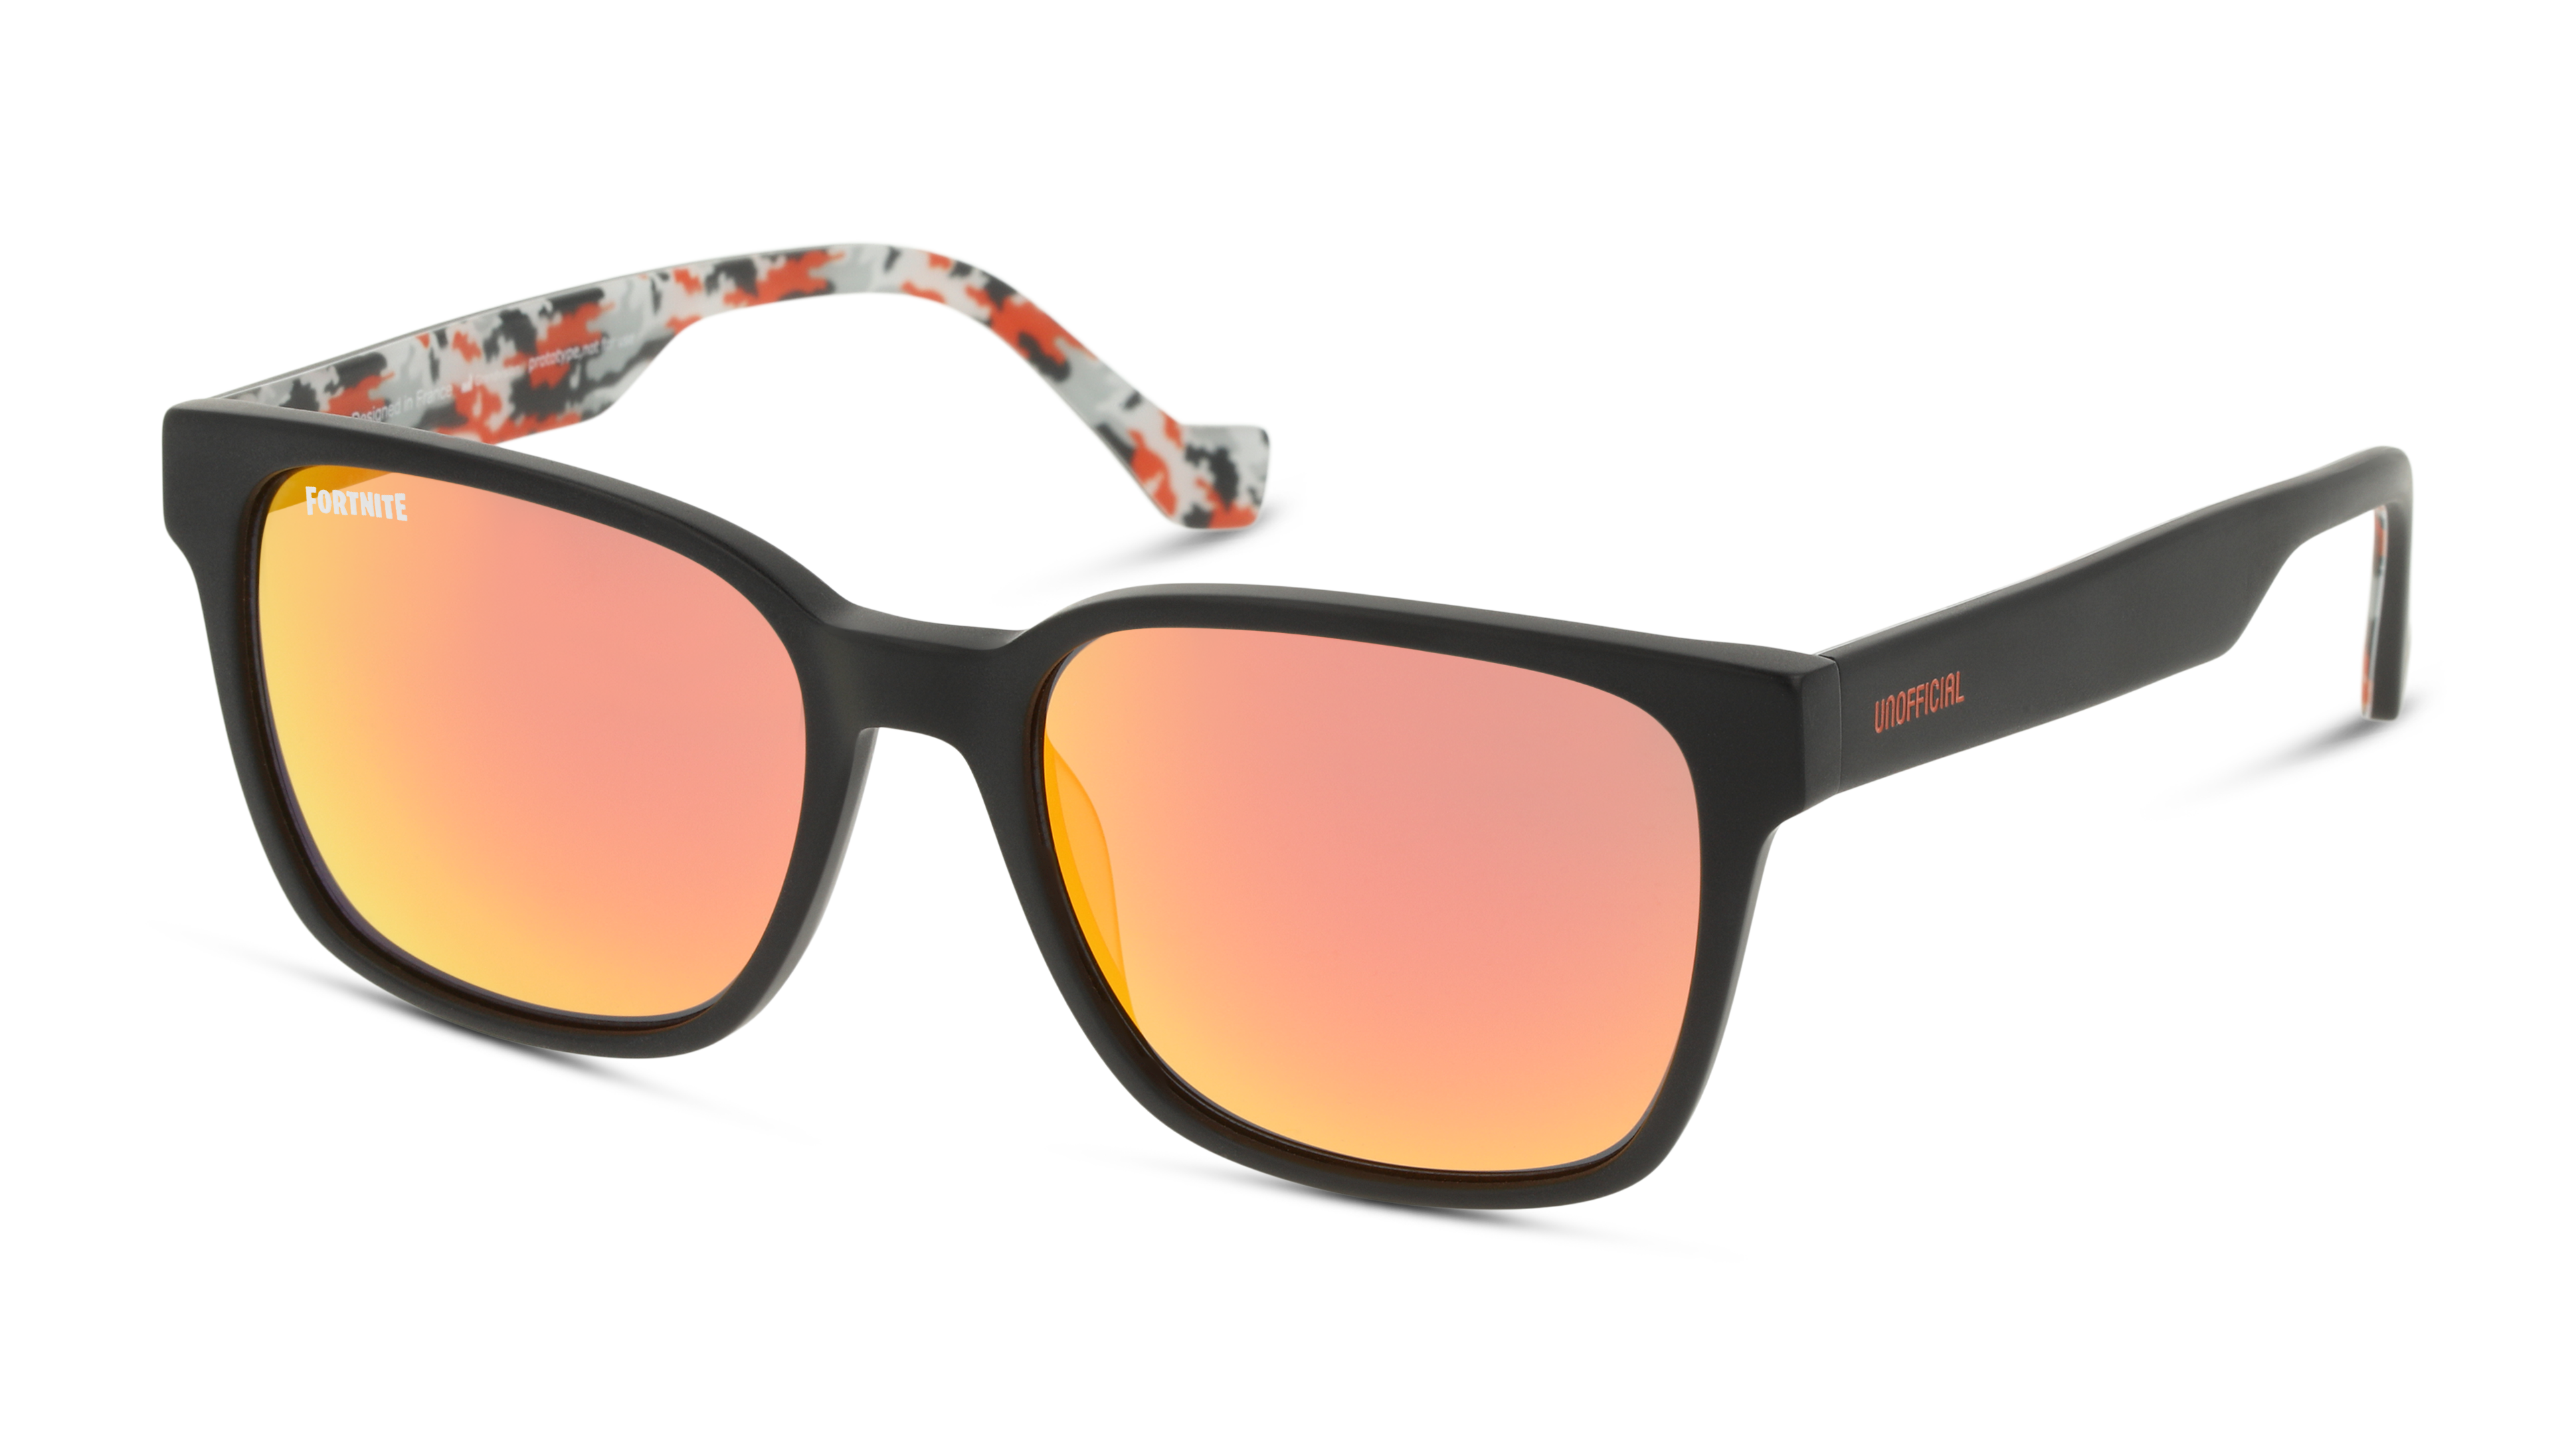 Angle_Left01 Fortnite with Unofficial UNSU0156 Sunglasses Grey / Black